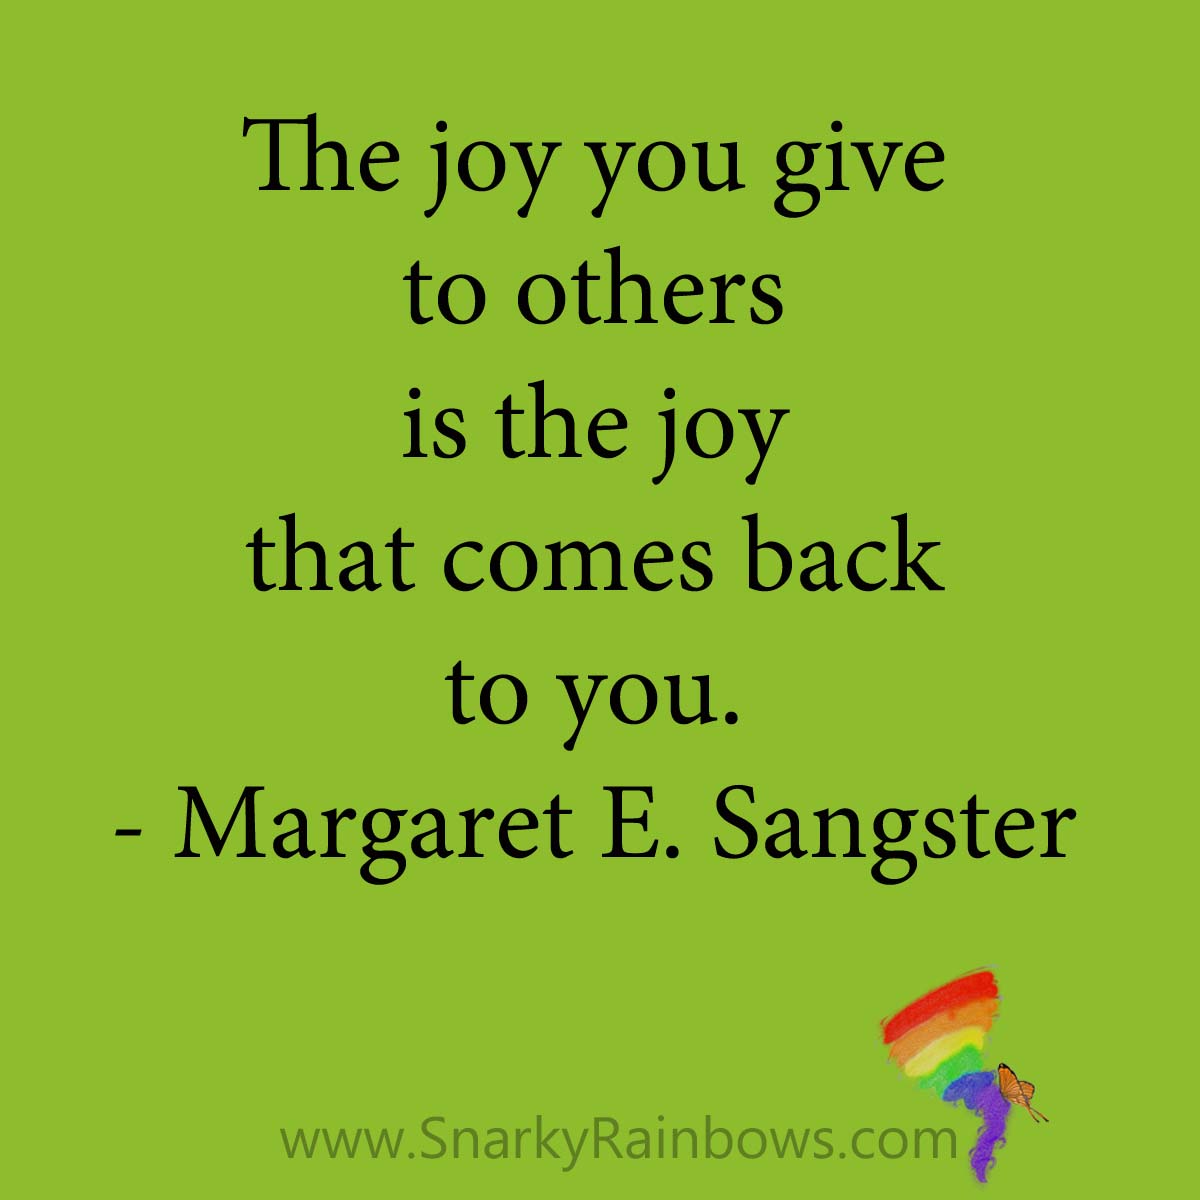 quote - margaret e sangster - joy you give